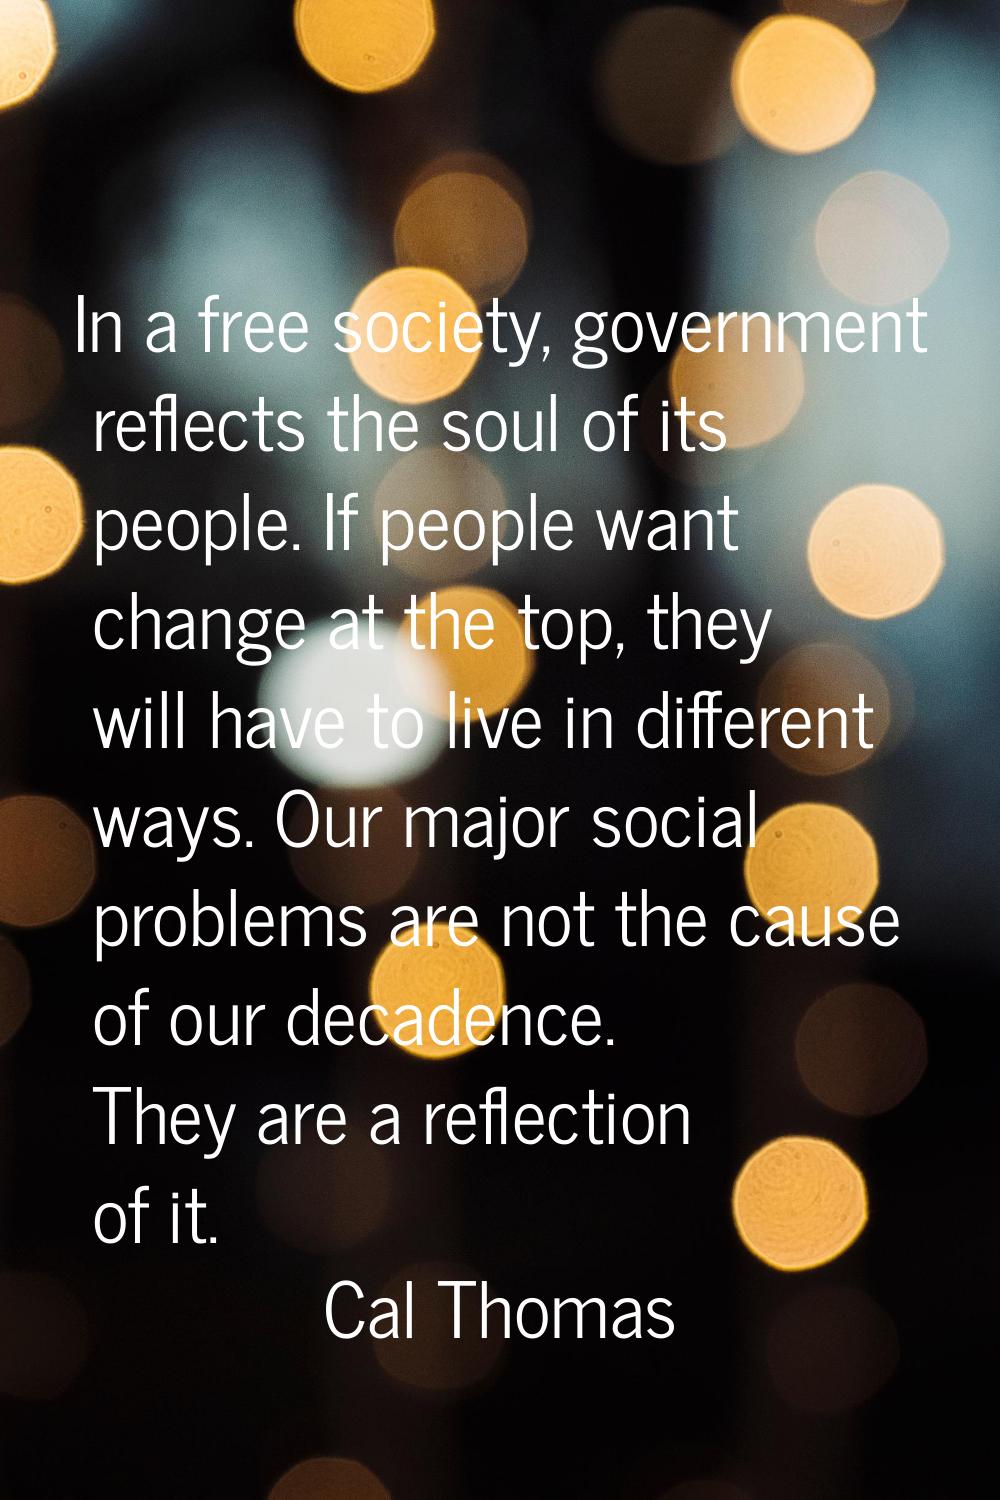 In a free society, government reflects the soul of its people. If people want change at the top, th